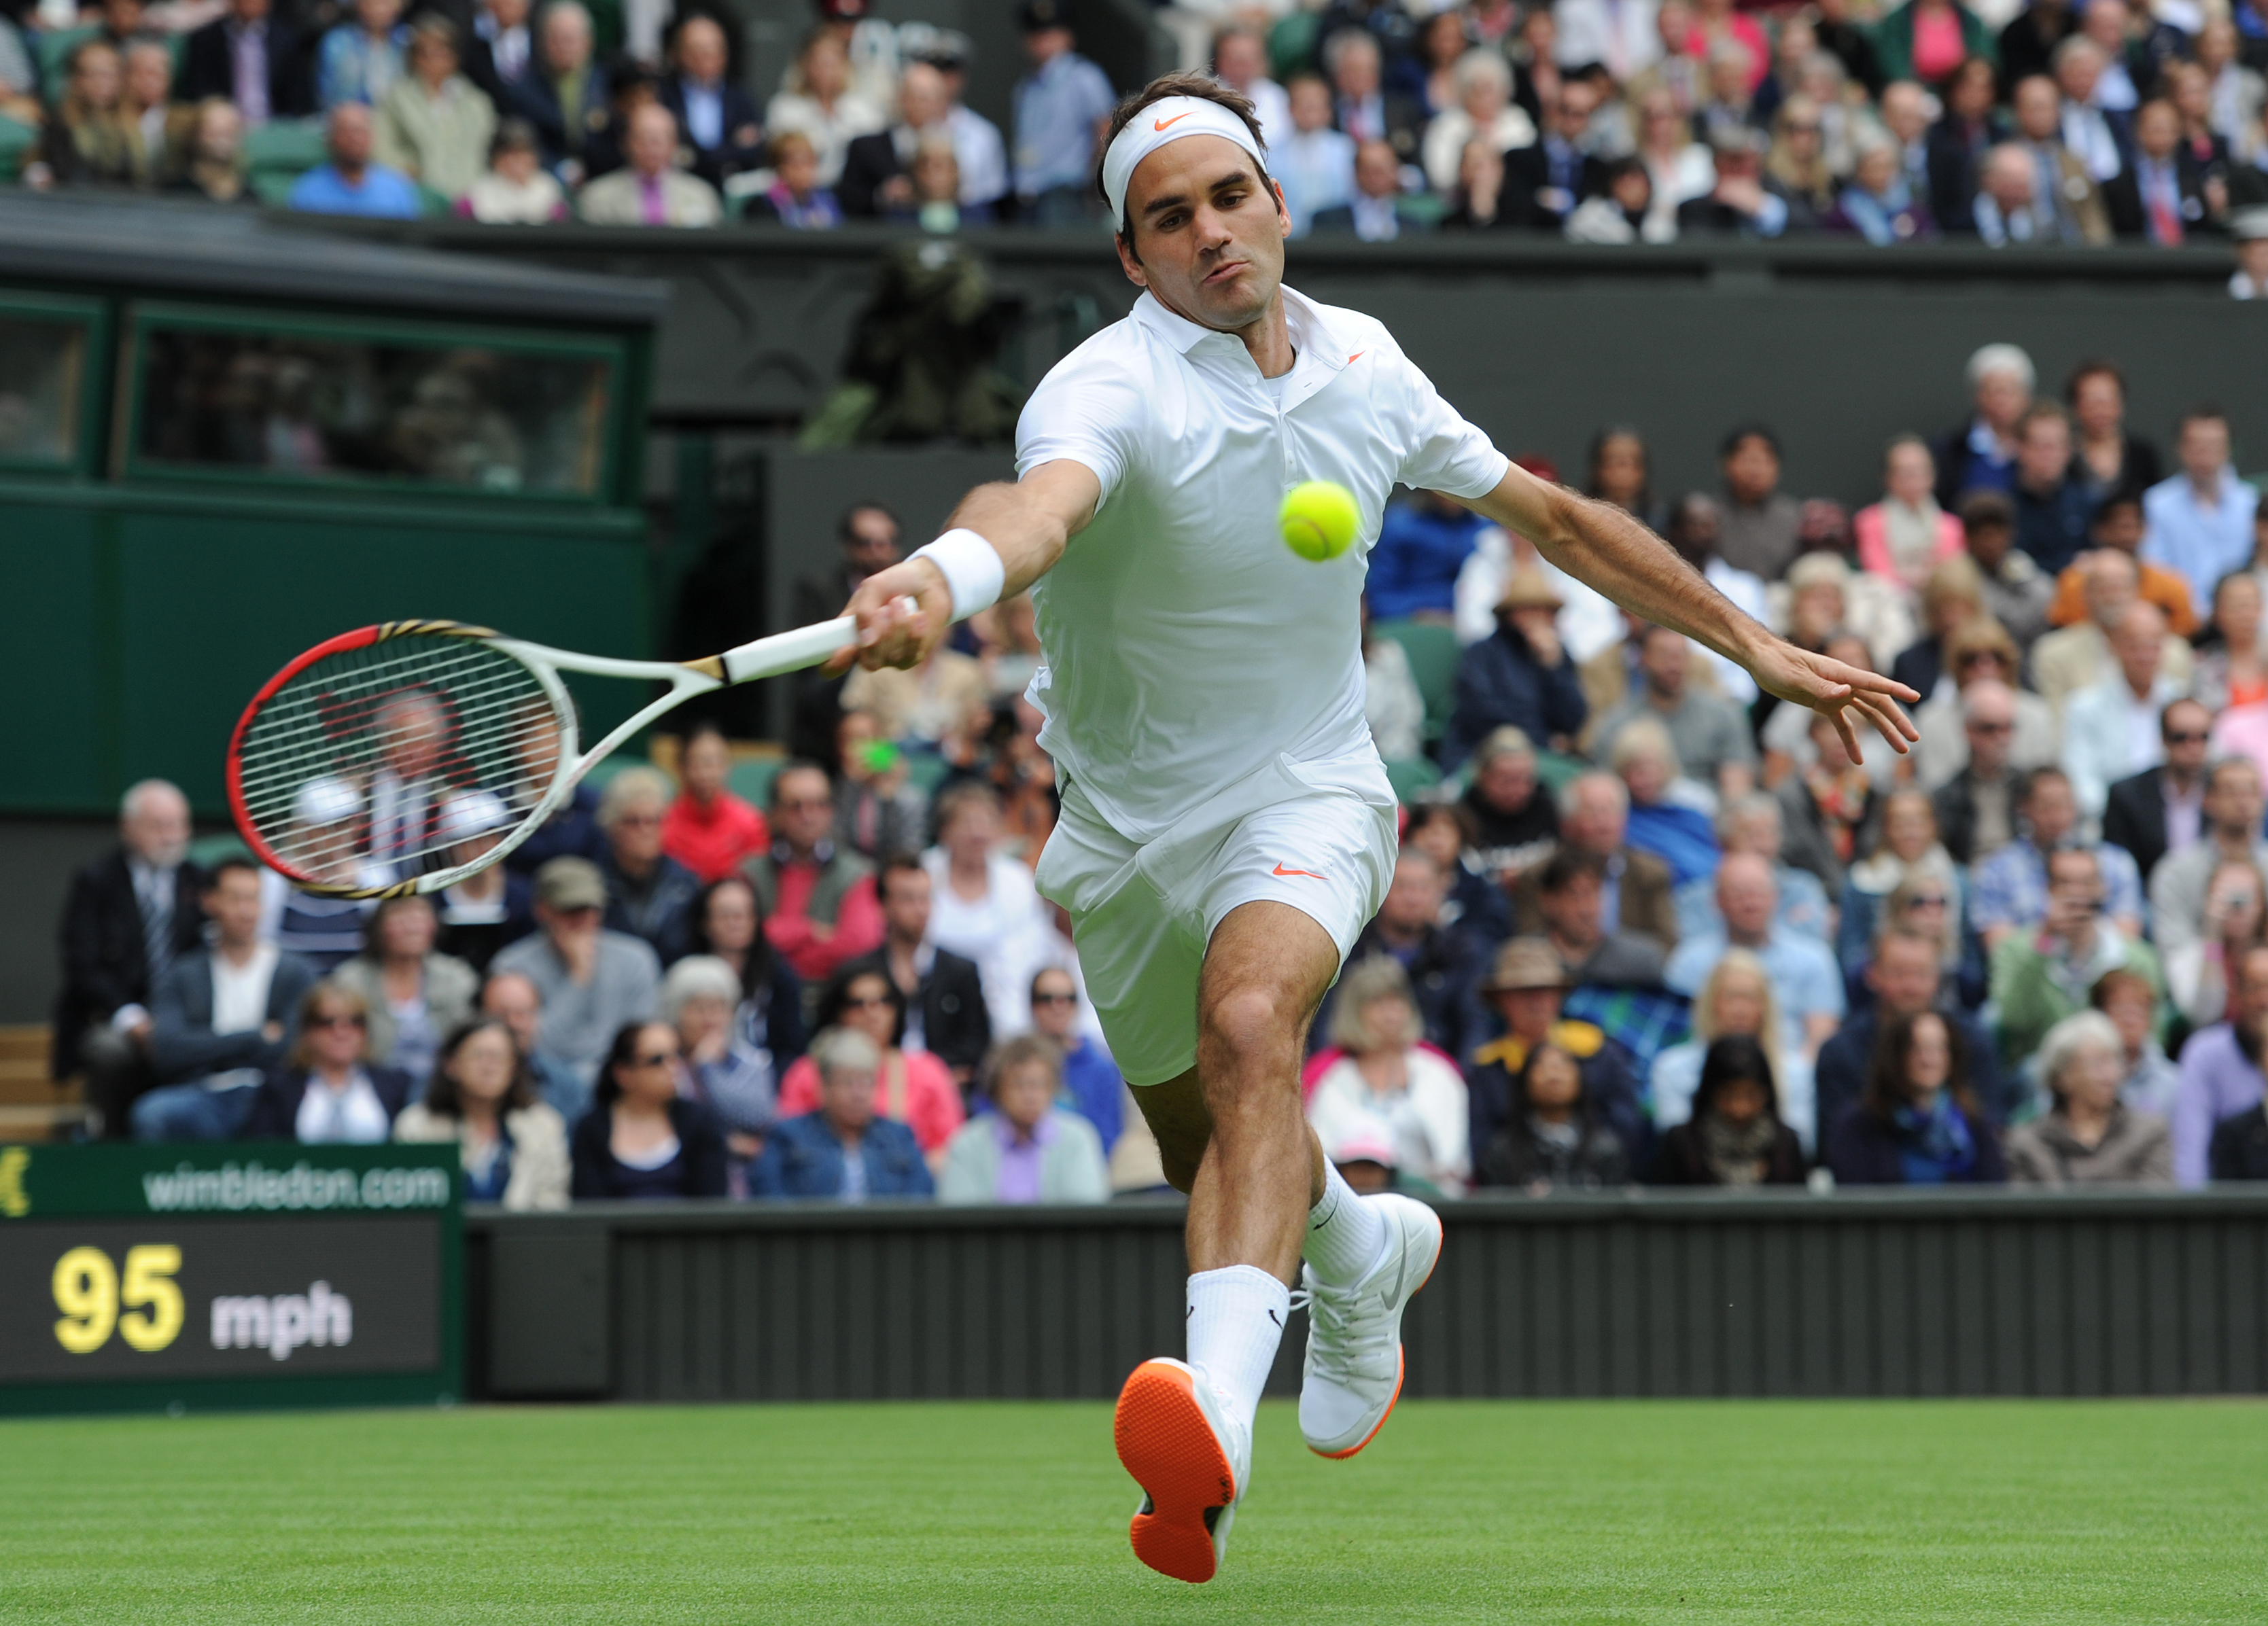 Roger Federer of Switzerland during his first round match against Victor Hanescu of Romania of on Day One of the 2013 Wimbledon Tennis Championships at the All England Lawn Tennis and Croquet Club in London, United Kingdom. (Visionhaus—Corbis via Getty Images)